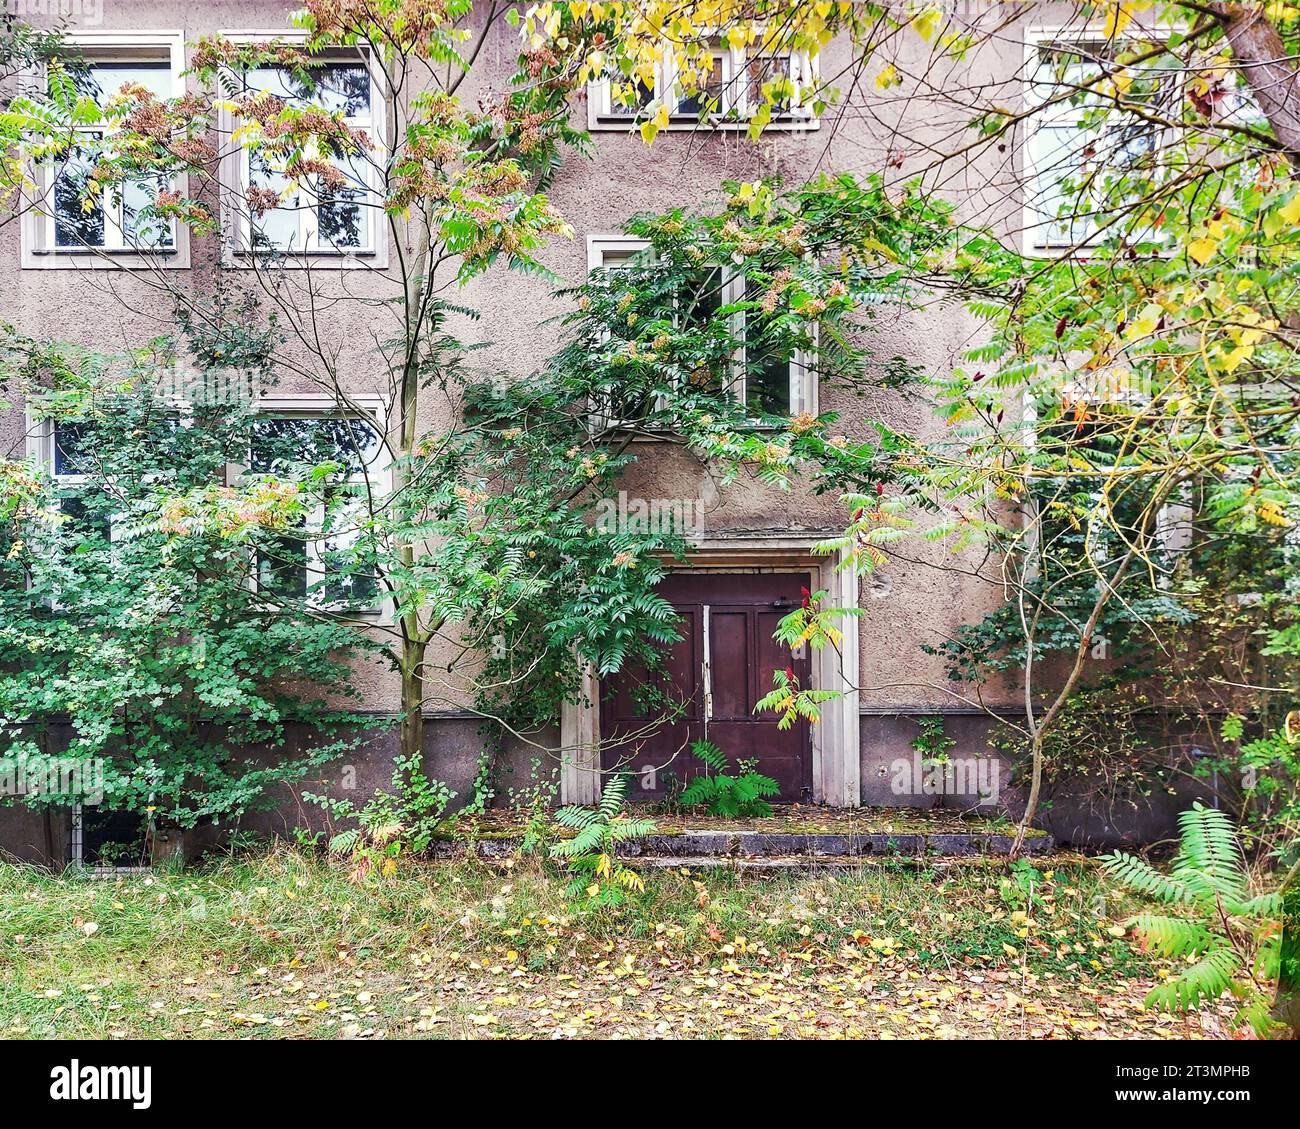 Facade of an old German building with dense vegetation. Stock Photo